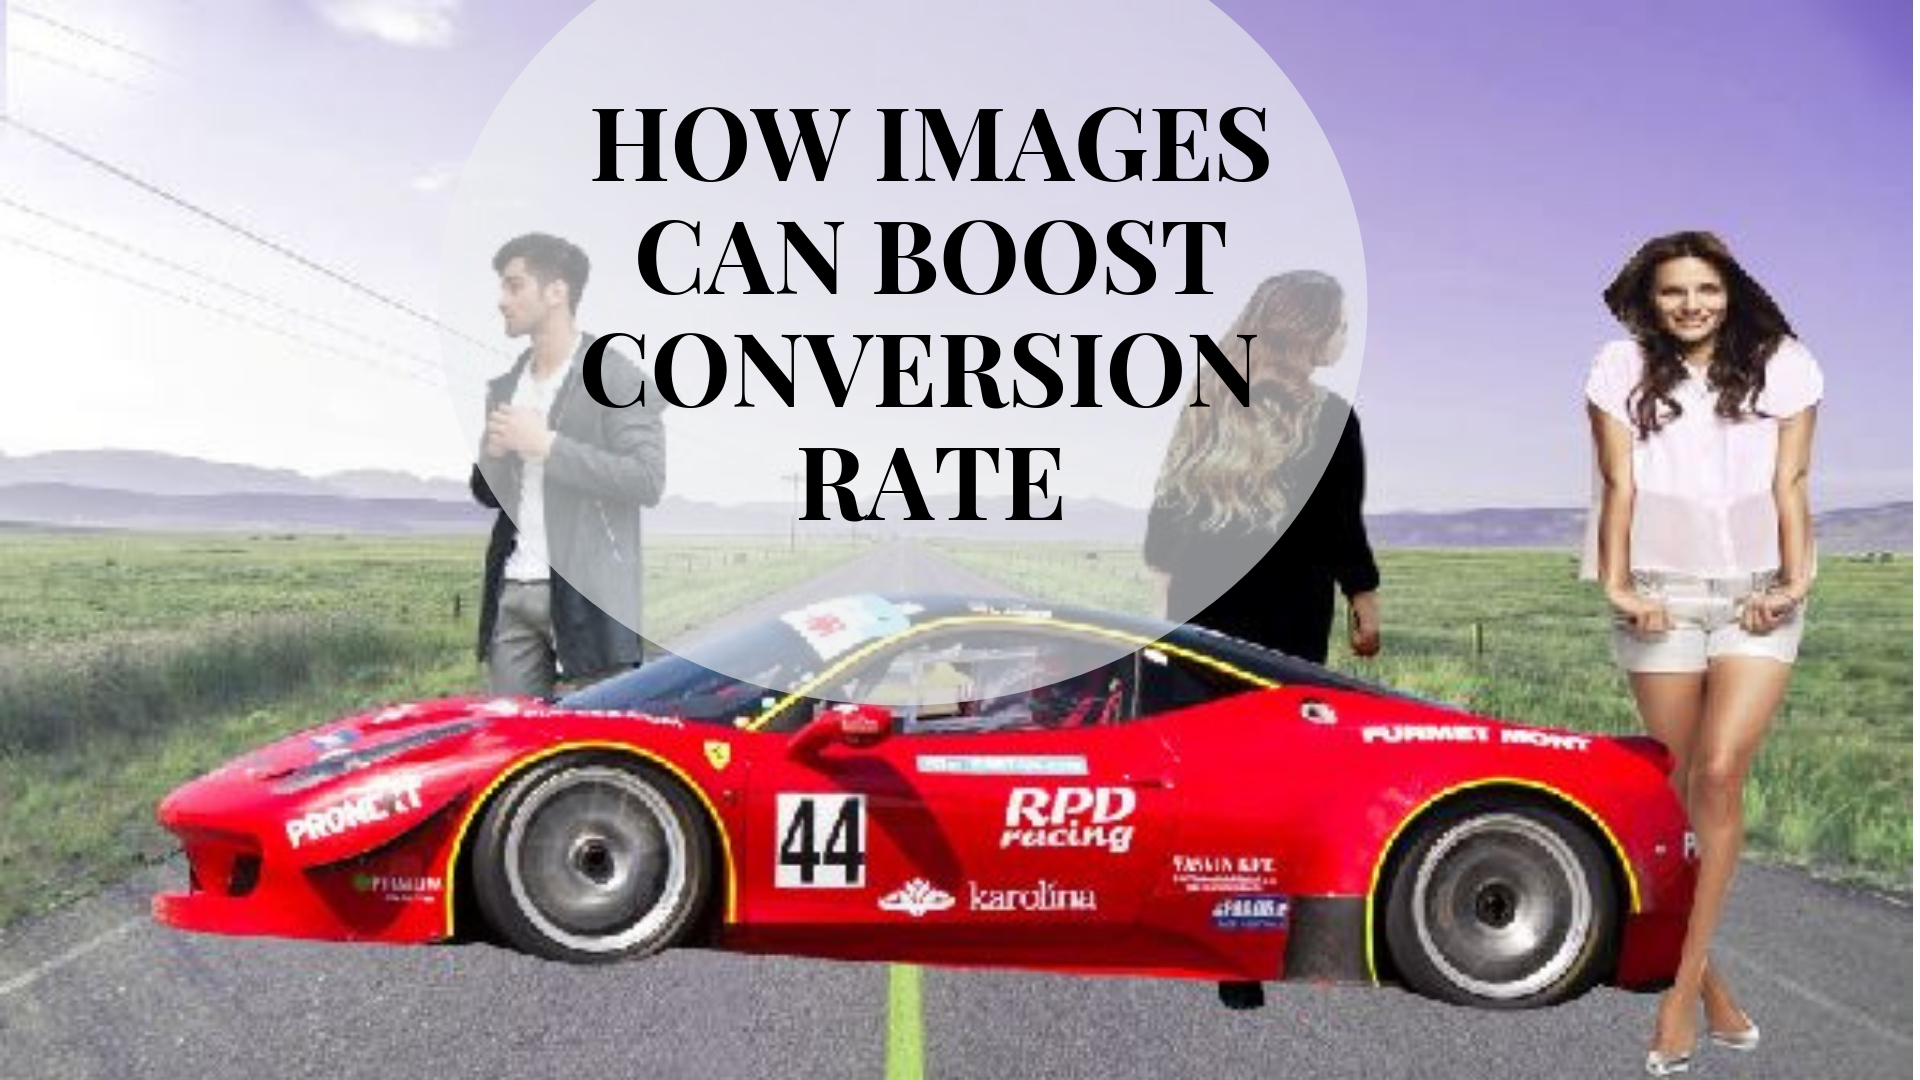 How Images Can Boost Conversion Rate